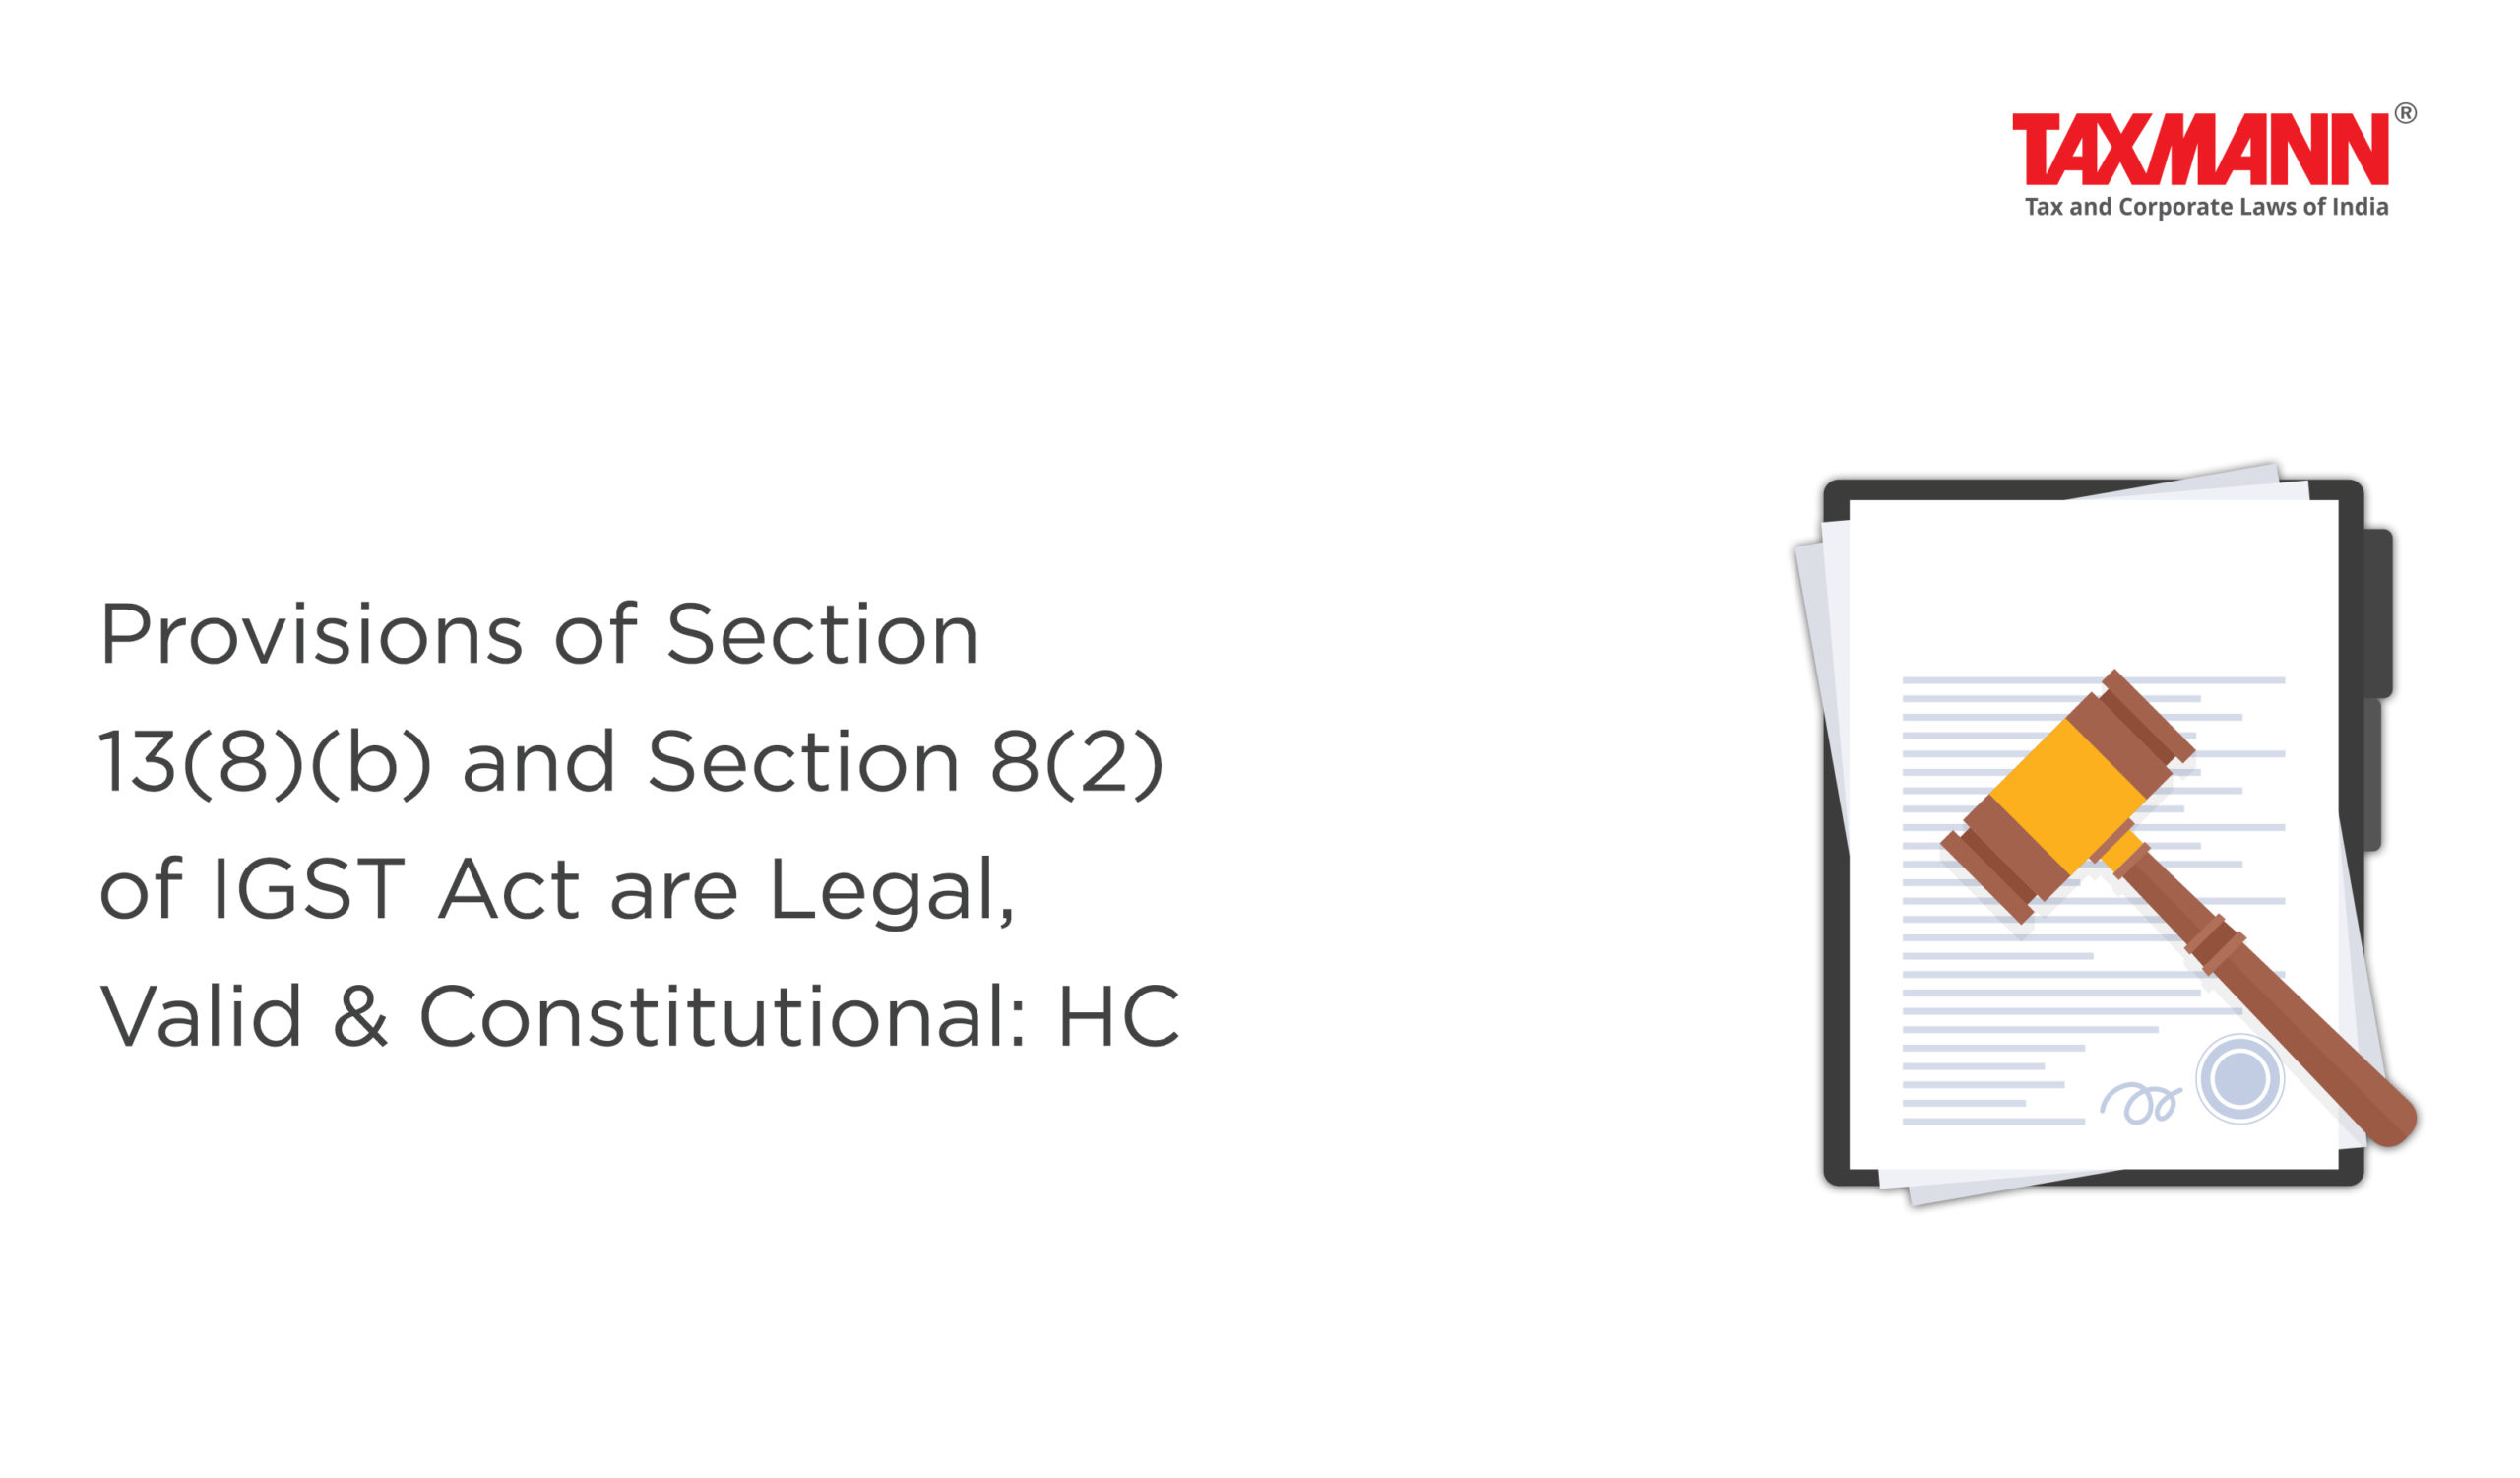 constitutional validity of Section 13(8)(b) and Section 8(2)